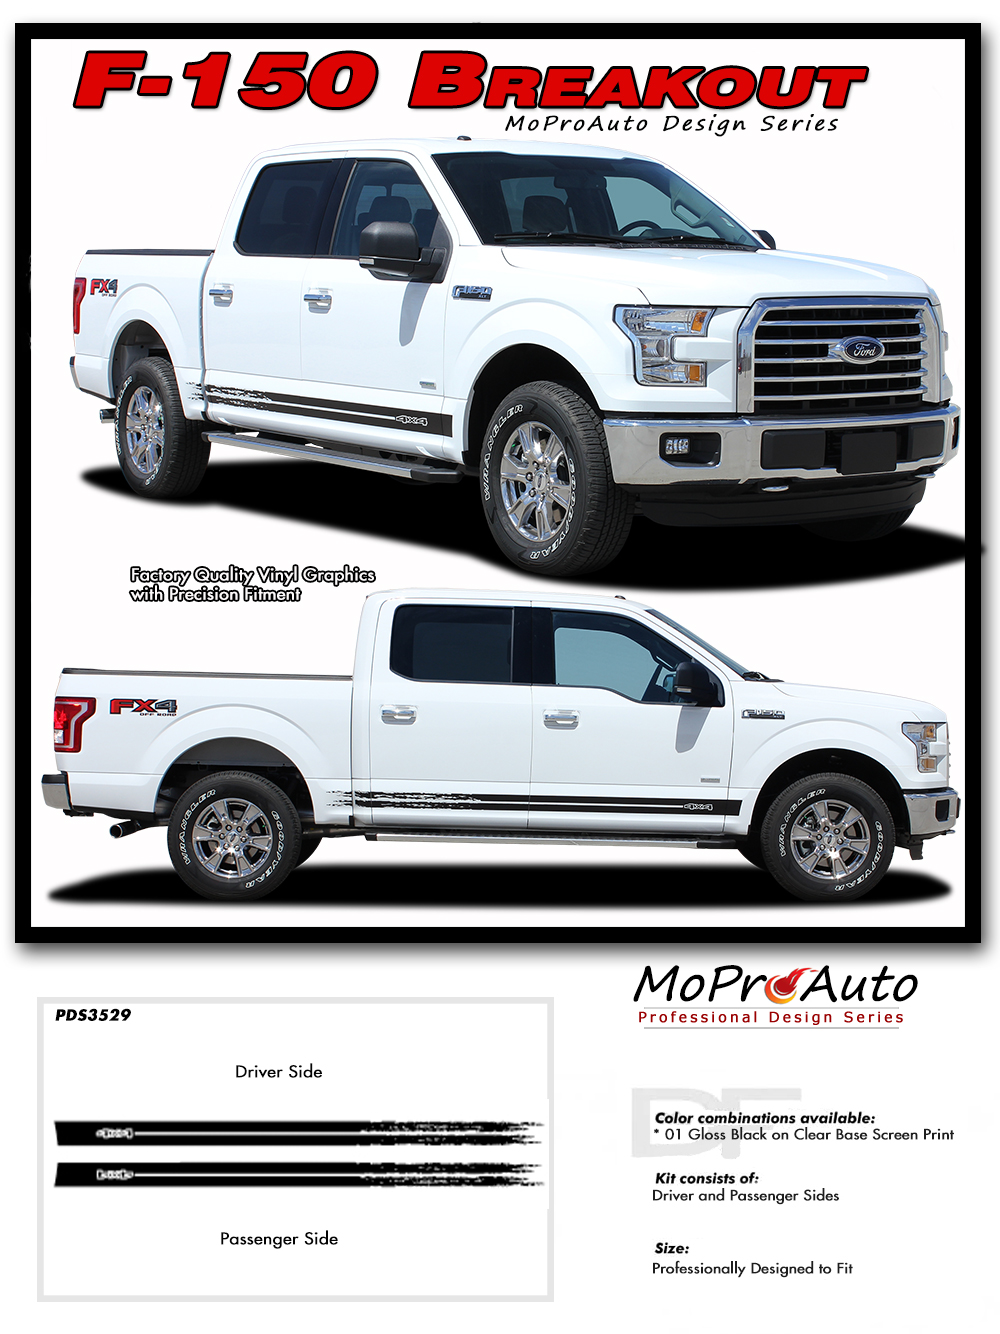 2015 2016 2017 2018 F-150 BREAKOUT ROCKER Ford F-Series  MoProAuto Pro Design Series Vinyl Graphics and Decals Kit